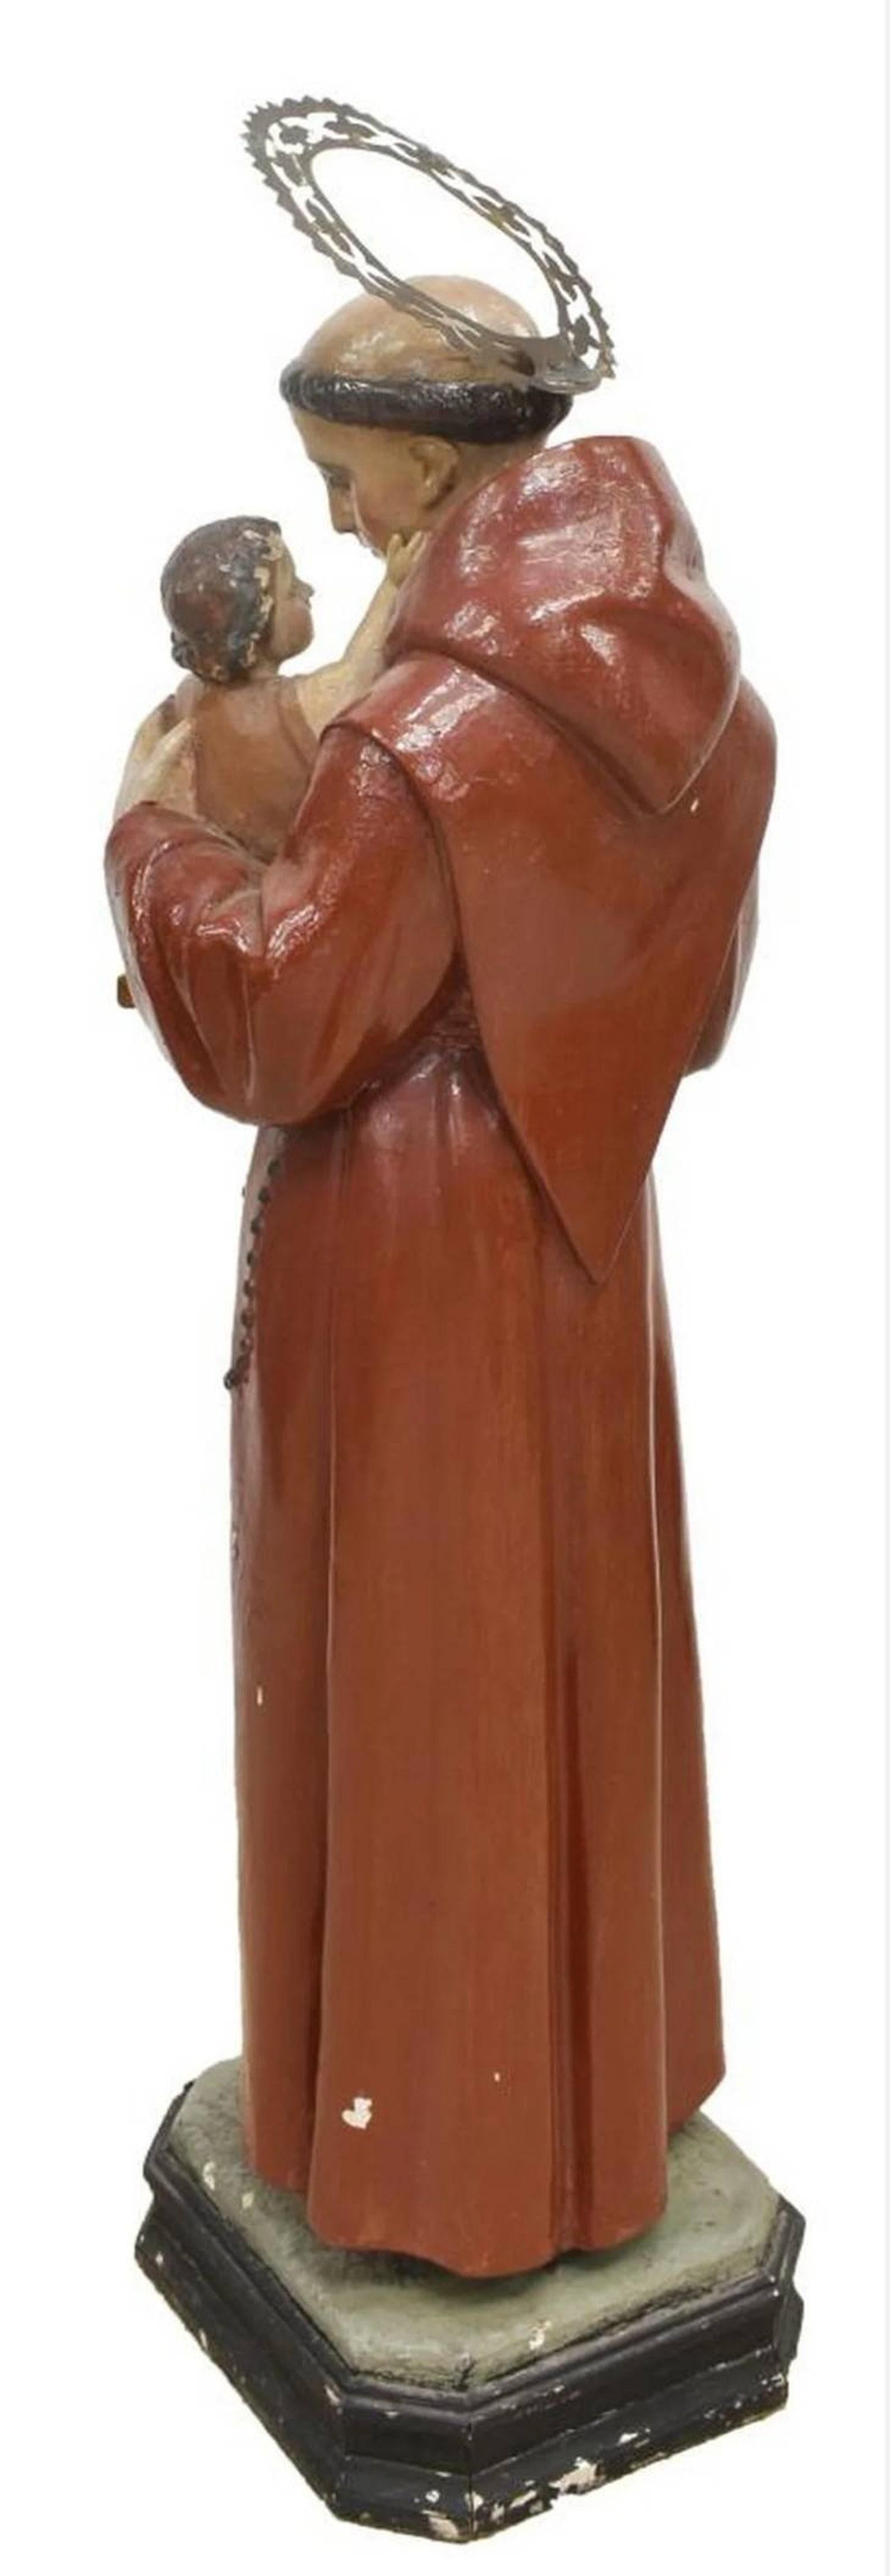 A wonderful antique religious carved wood and plaster Catholic Church altar figure. The large sculpture depicting Saint Anthony of Padua, dating to the late 19th / early 20th century. Depicted in Franciscan habit, with pierced gilt metal halo, posed